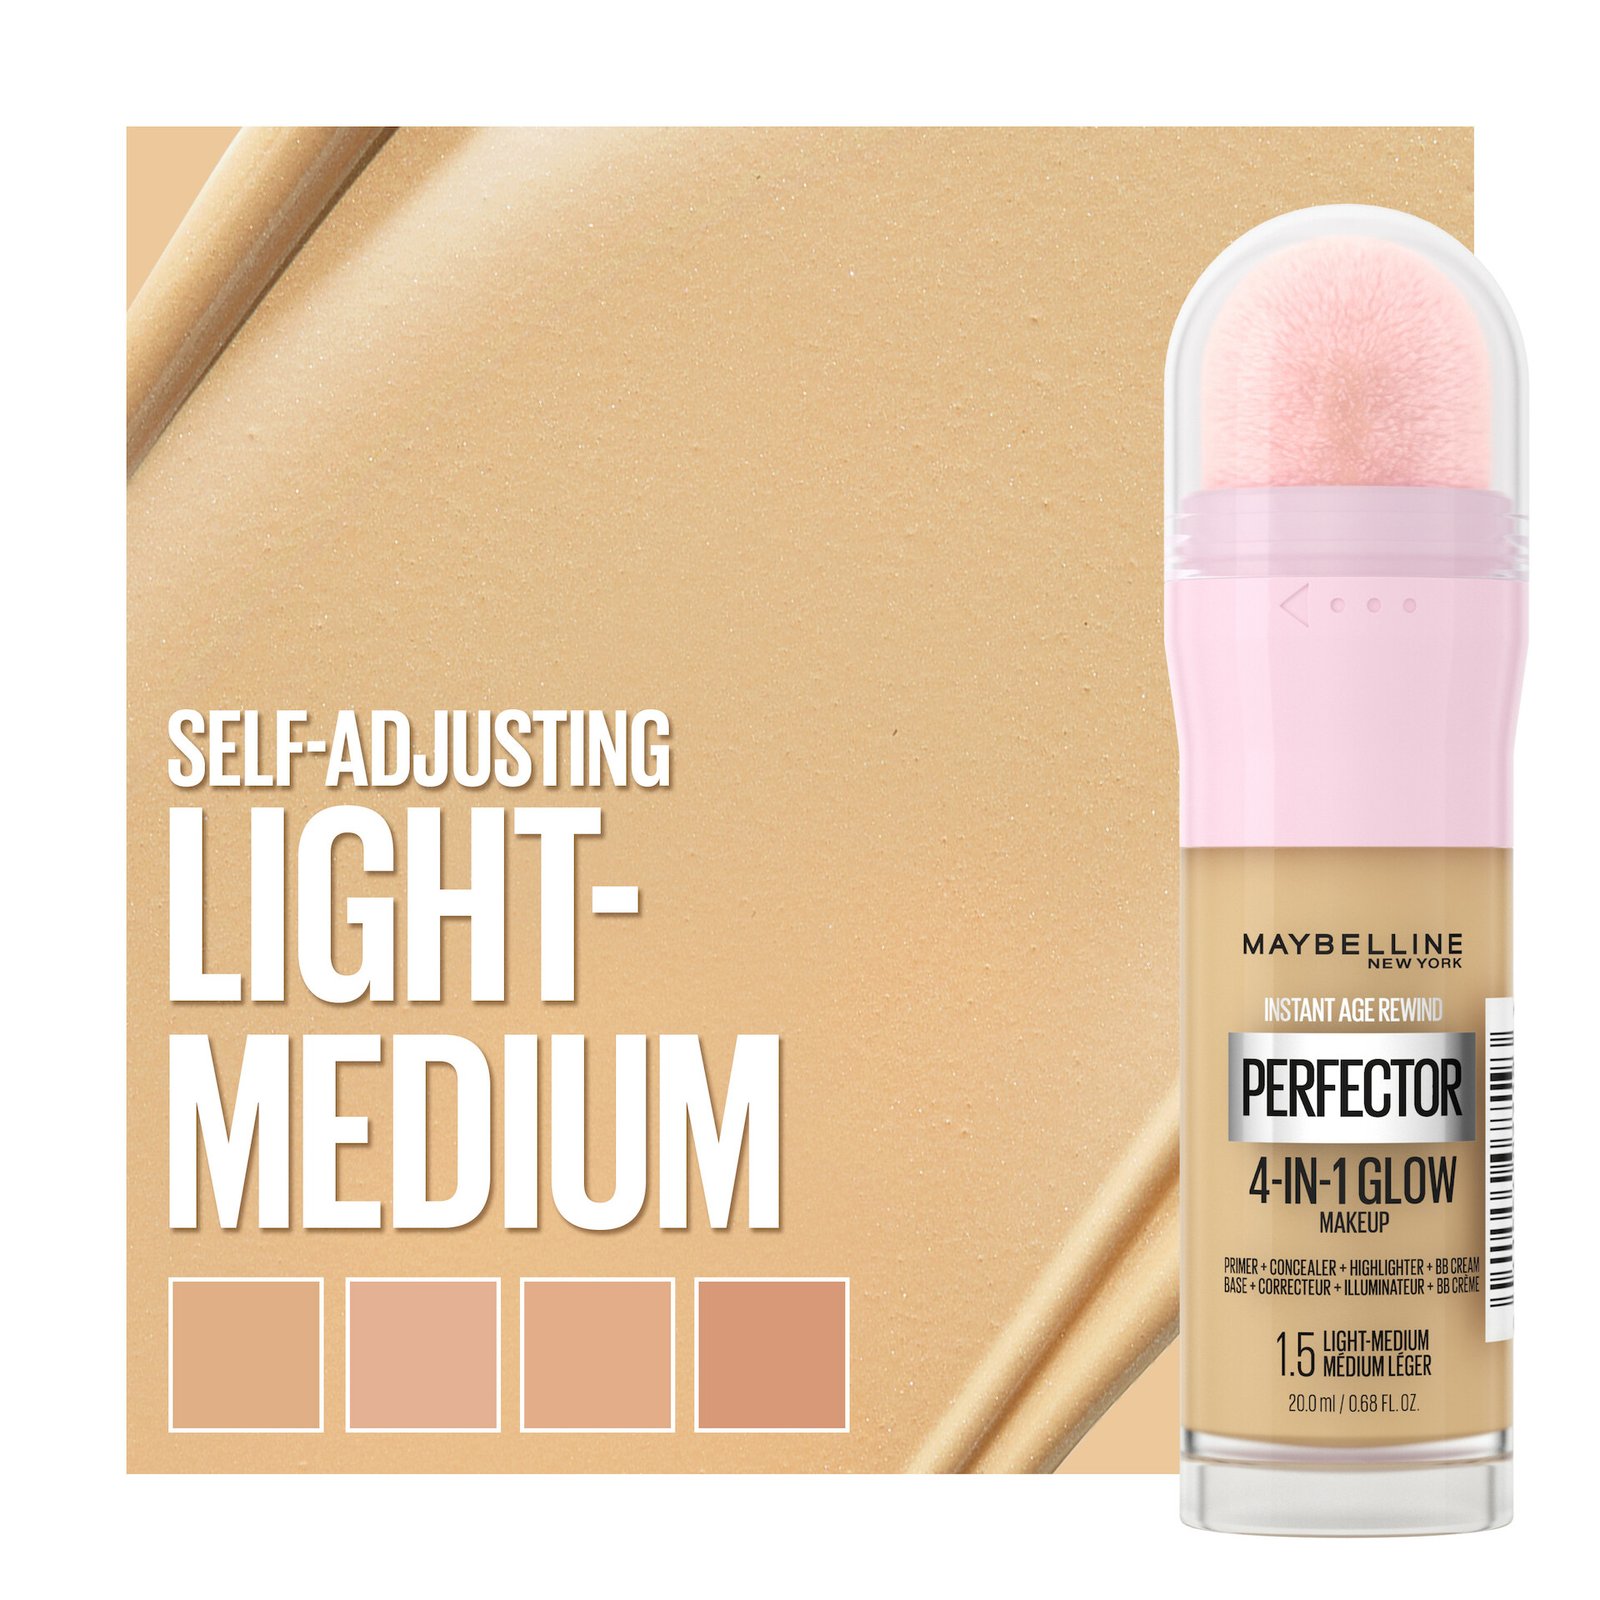 Maybelline New York Instant Perfector 4-in-1 Glow Makeup Foundation 1.5 Light Medium